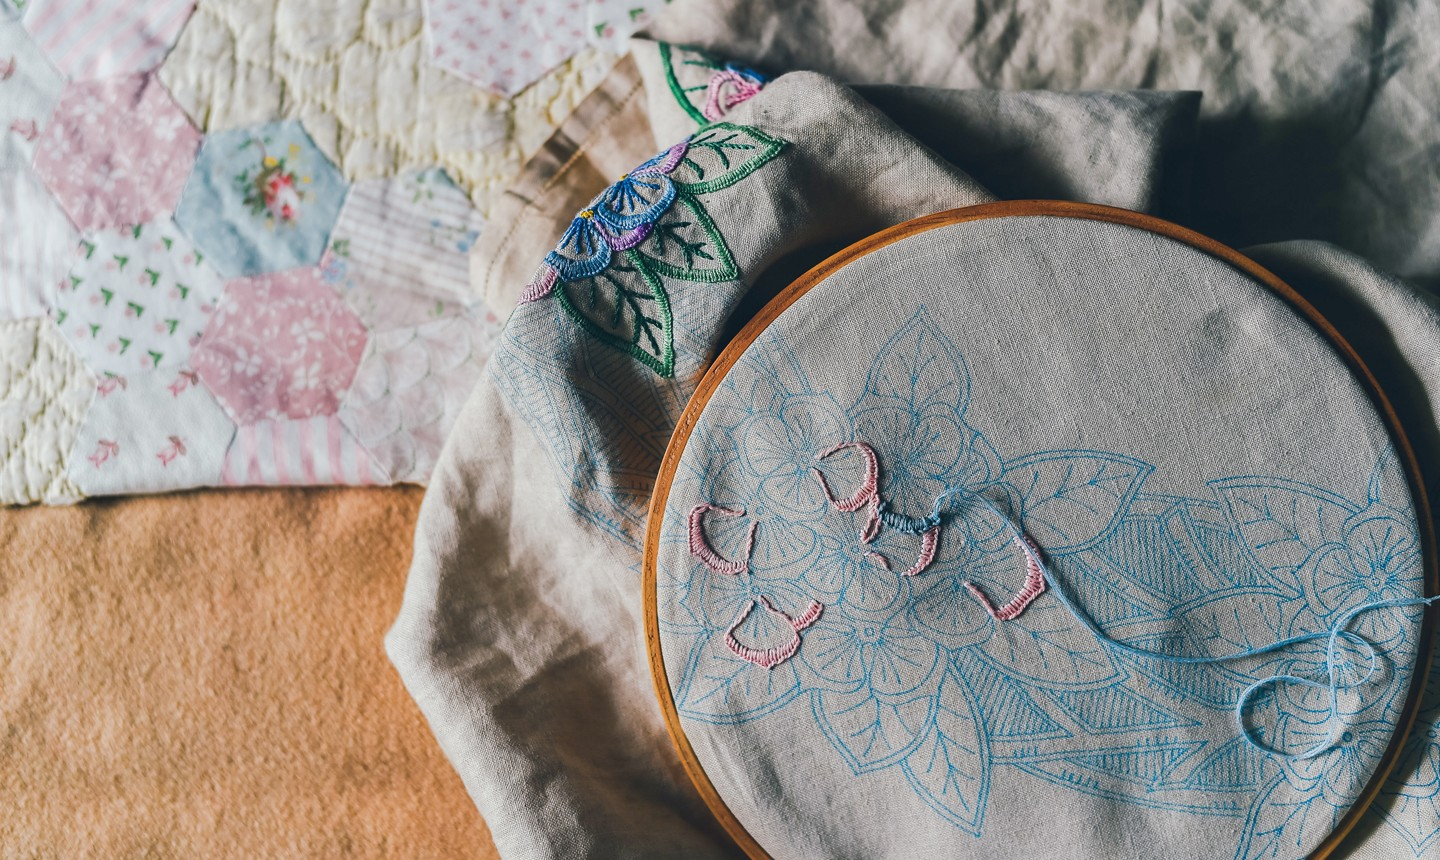 Embroidery Transfer Patterns 5 Simple Ways To Transfer Embroidery Designs